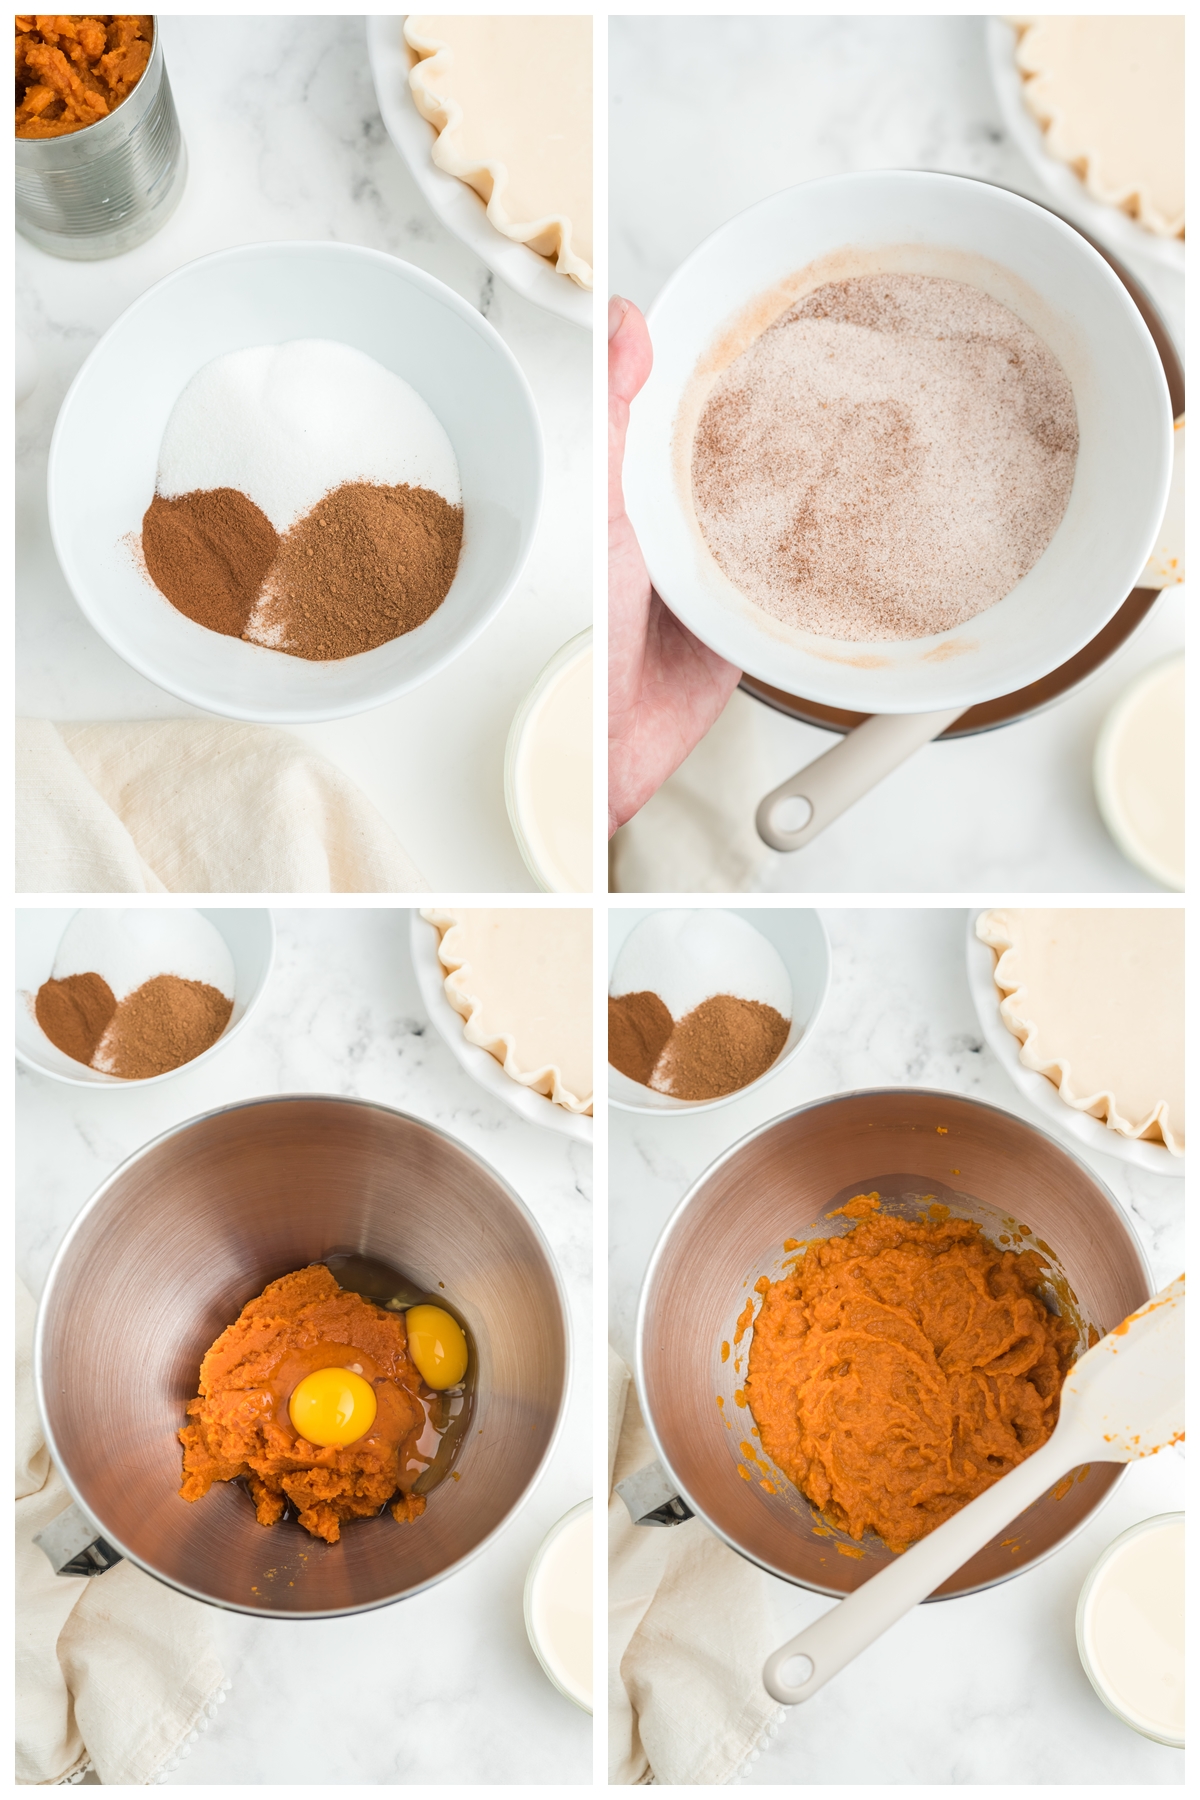 Procedure of making a pumpkin pie recipe. Mixing the ingredients until smooth.